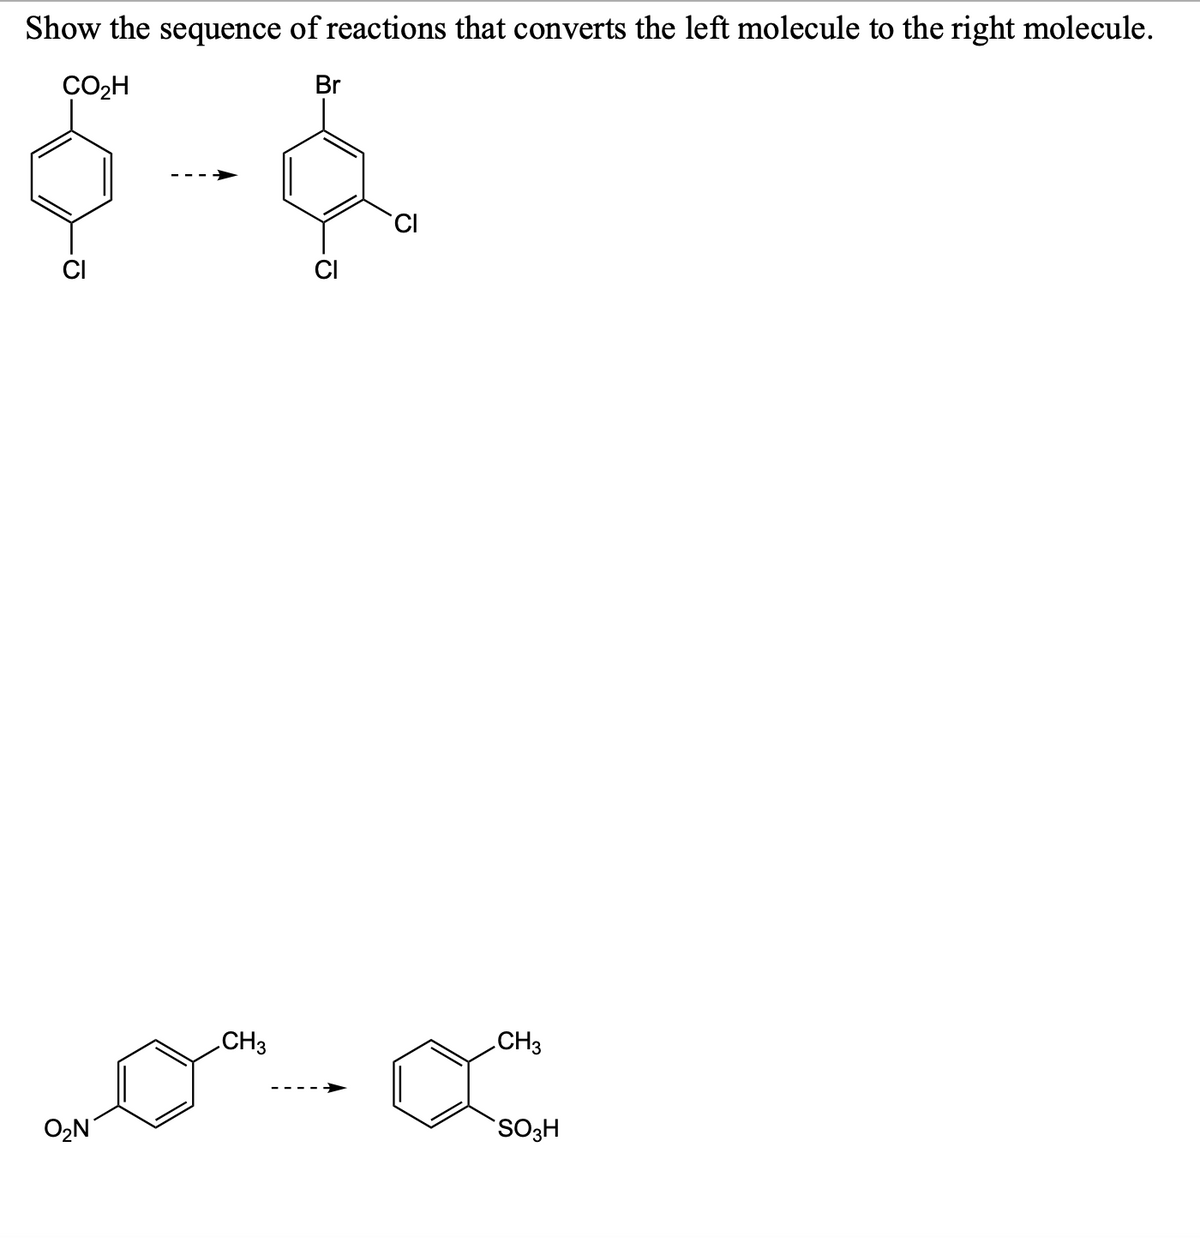 Show the sequence of reactions that converts the left molecule to the right molecule.
CO₂H
Br
O₂N
0
CI
CH3
CH3
SO3H